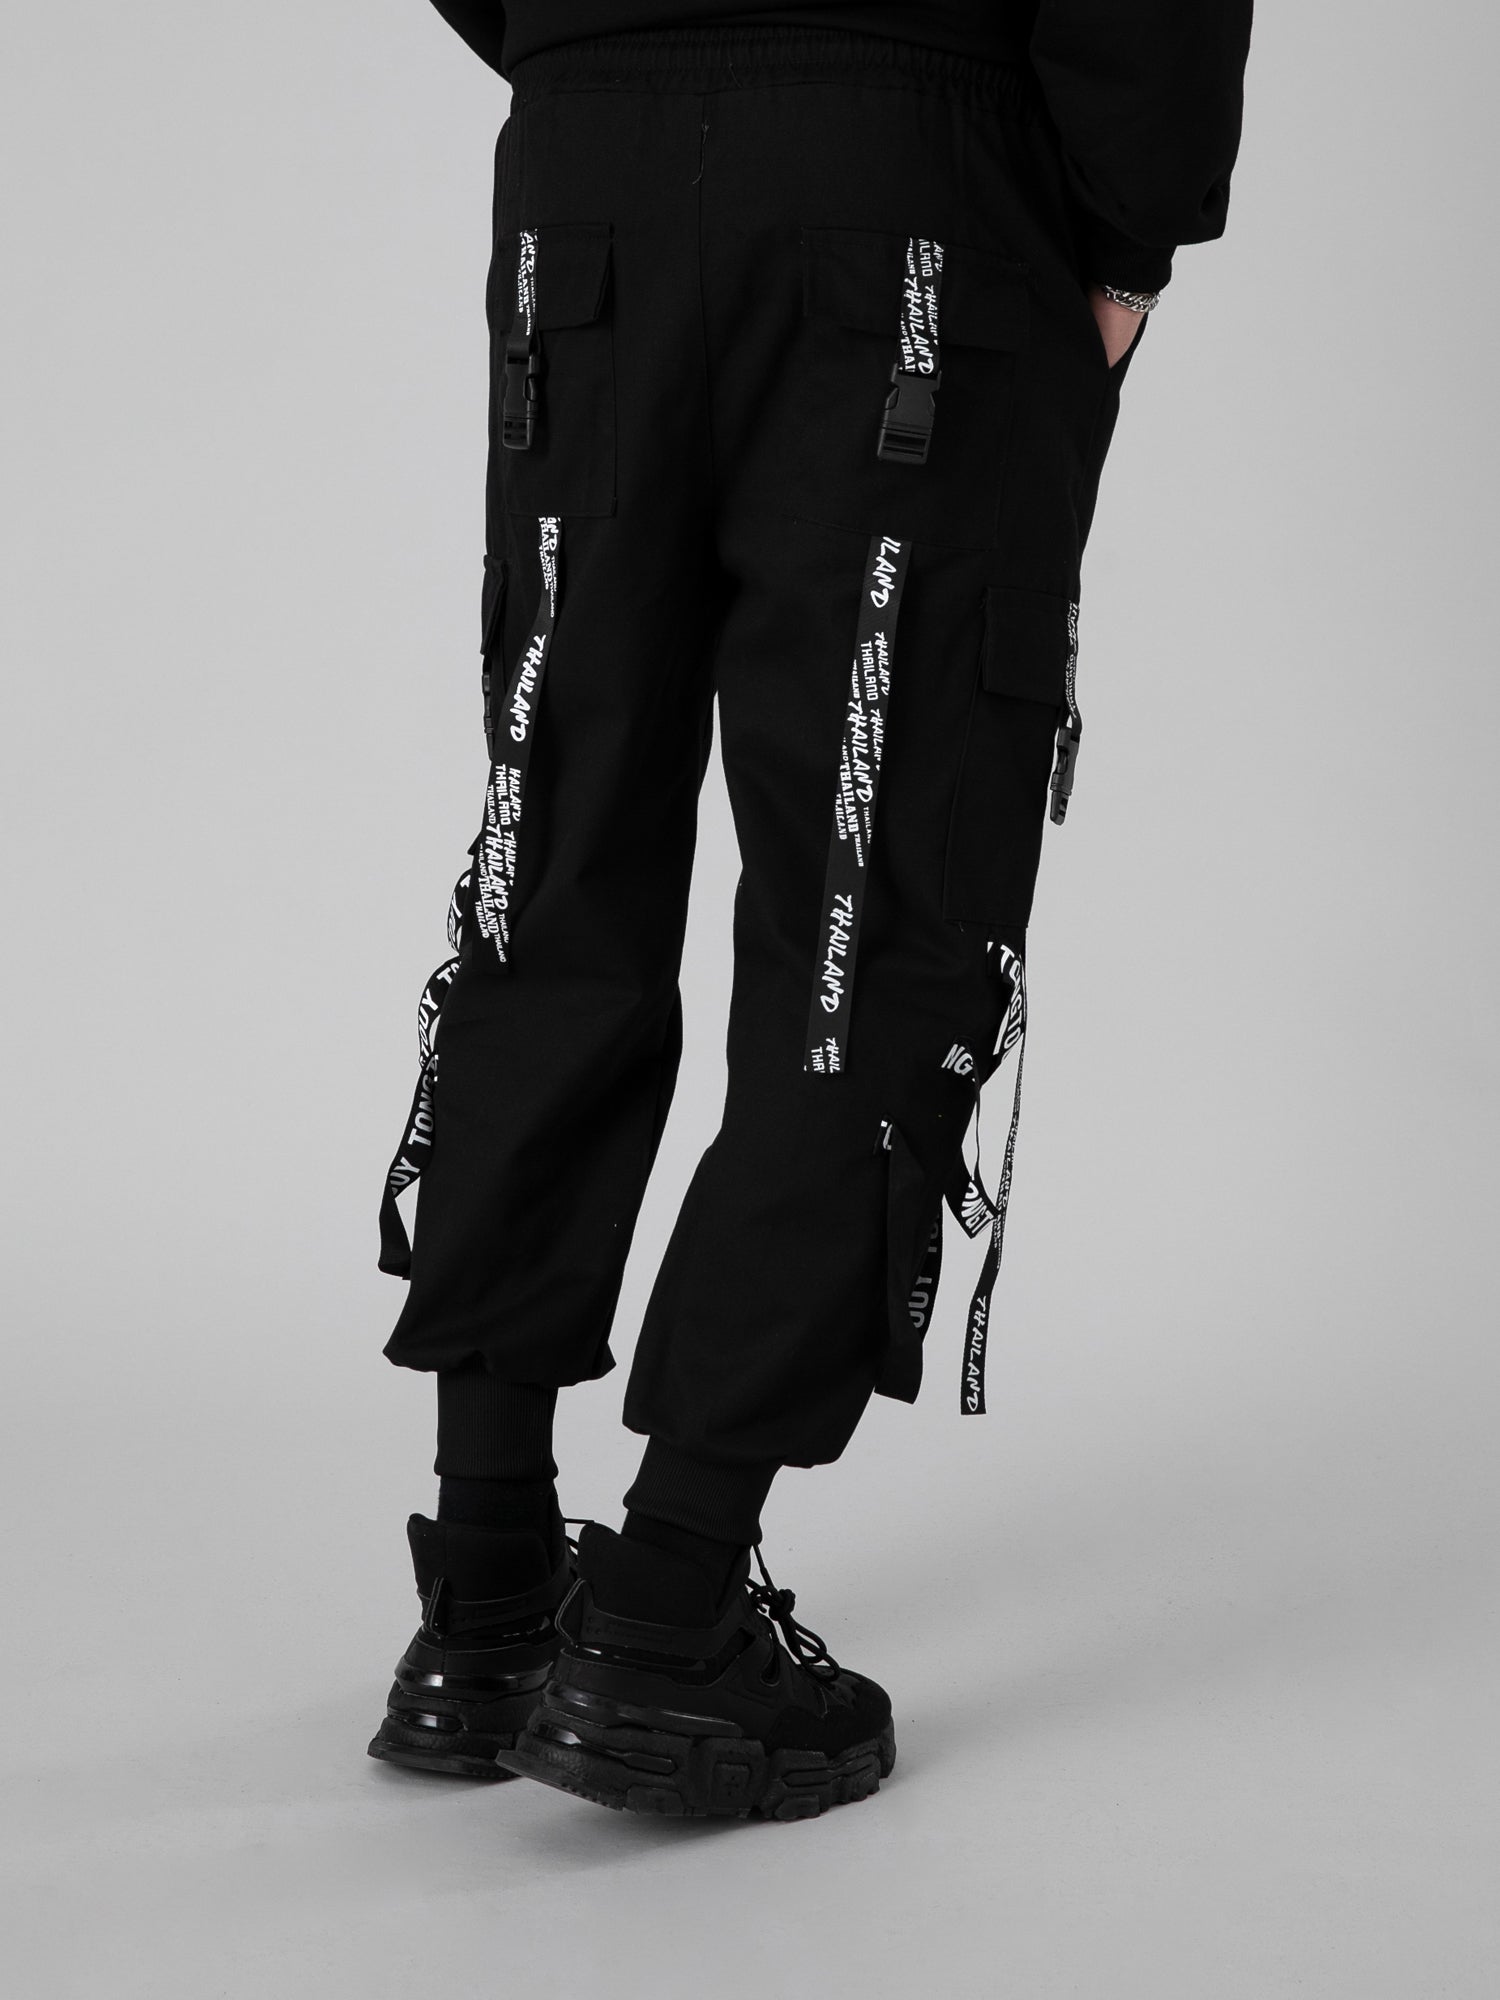 JUSTNOTAG X Text Streamer Stylish Casual Trouser Jogger Pants